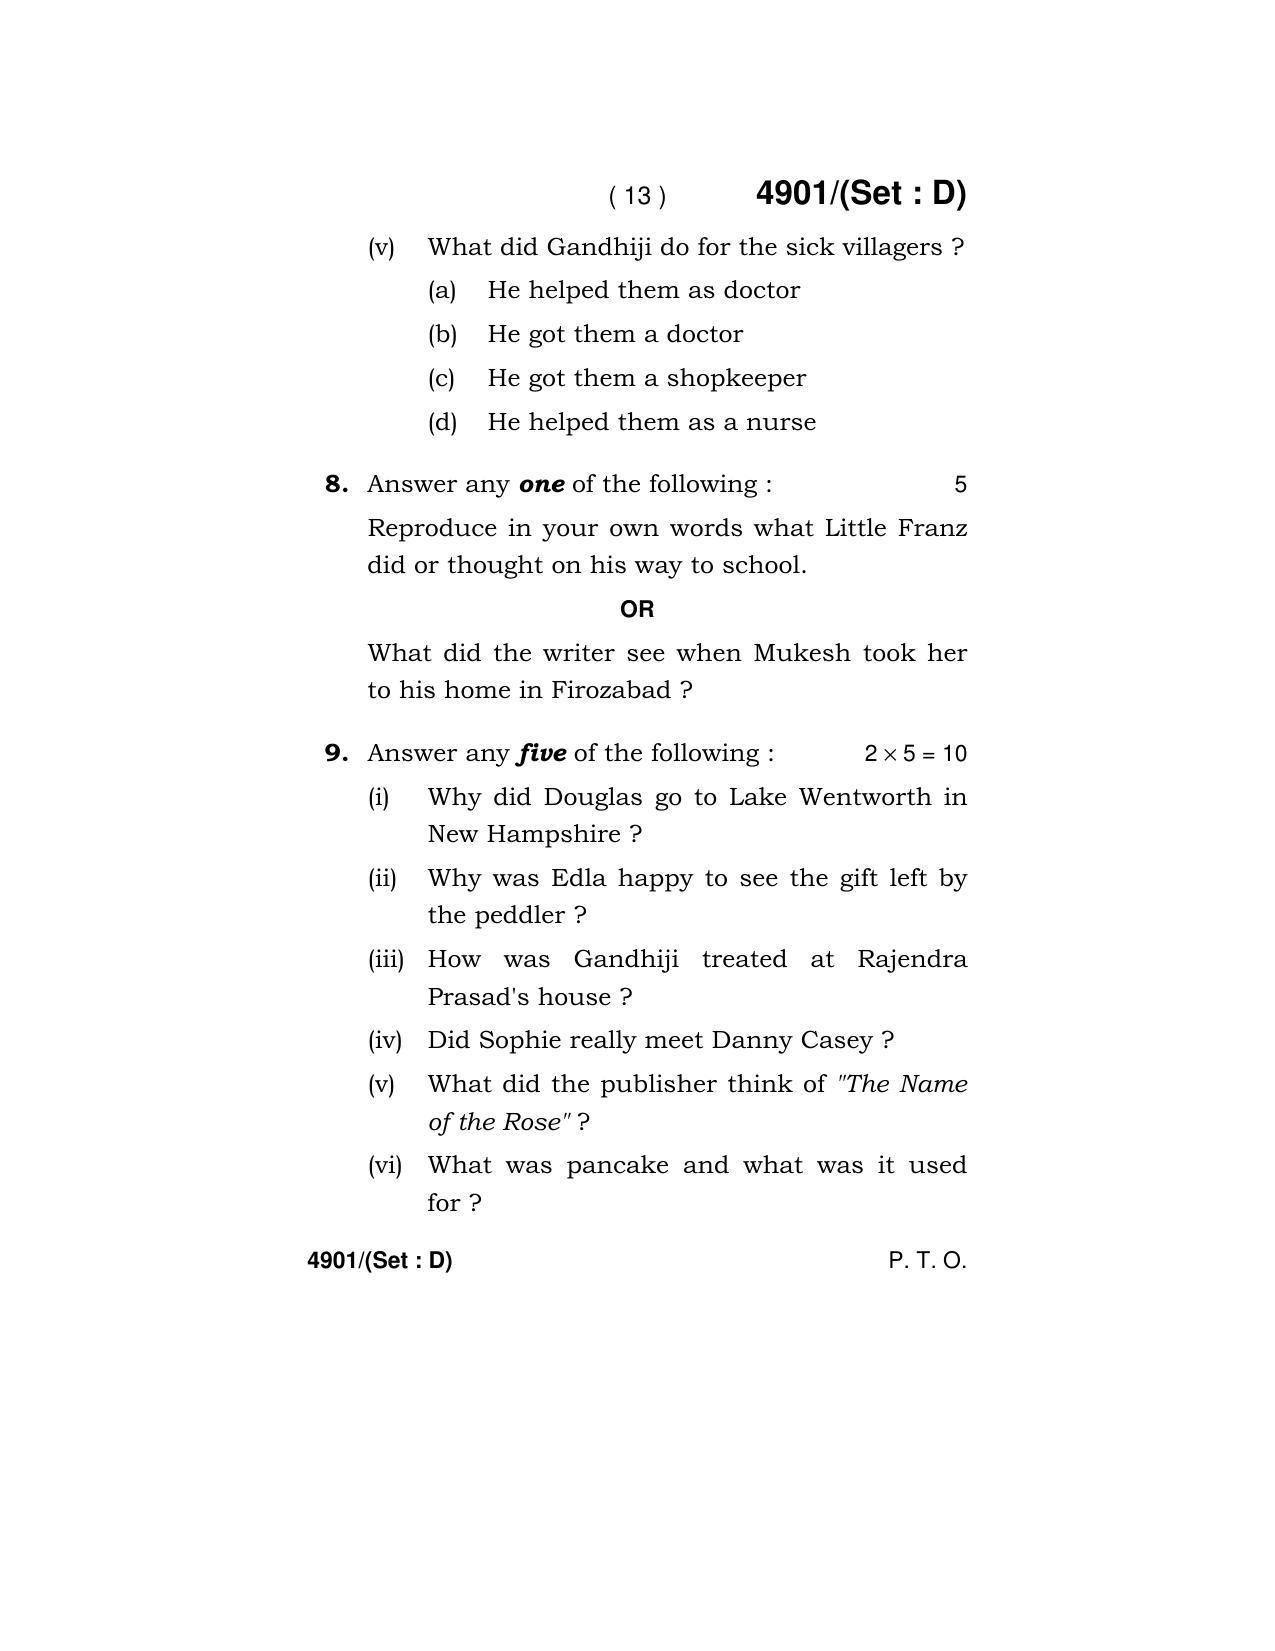 Haryana Board HBSE Class 12 English Core 2020 Question Paper - Page 61